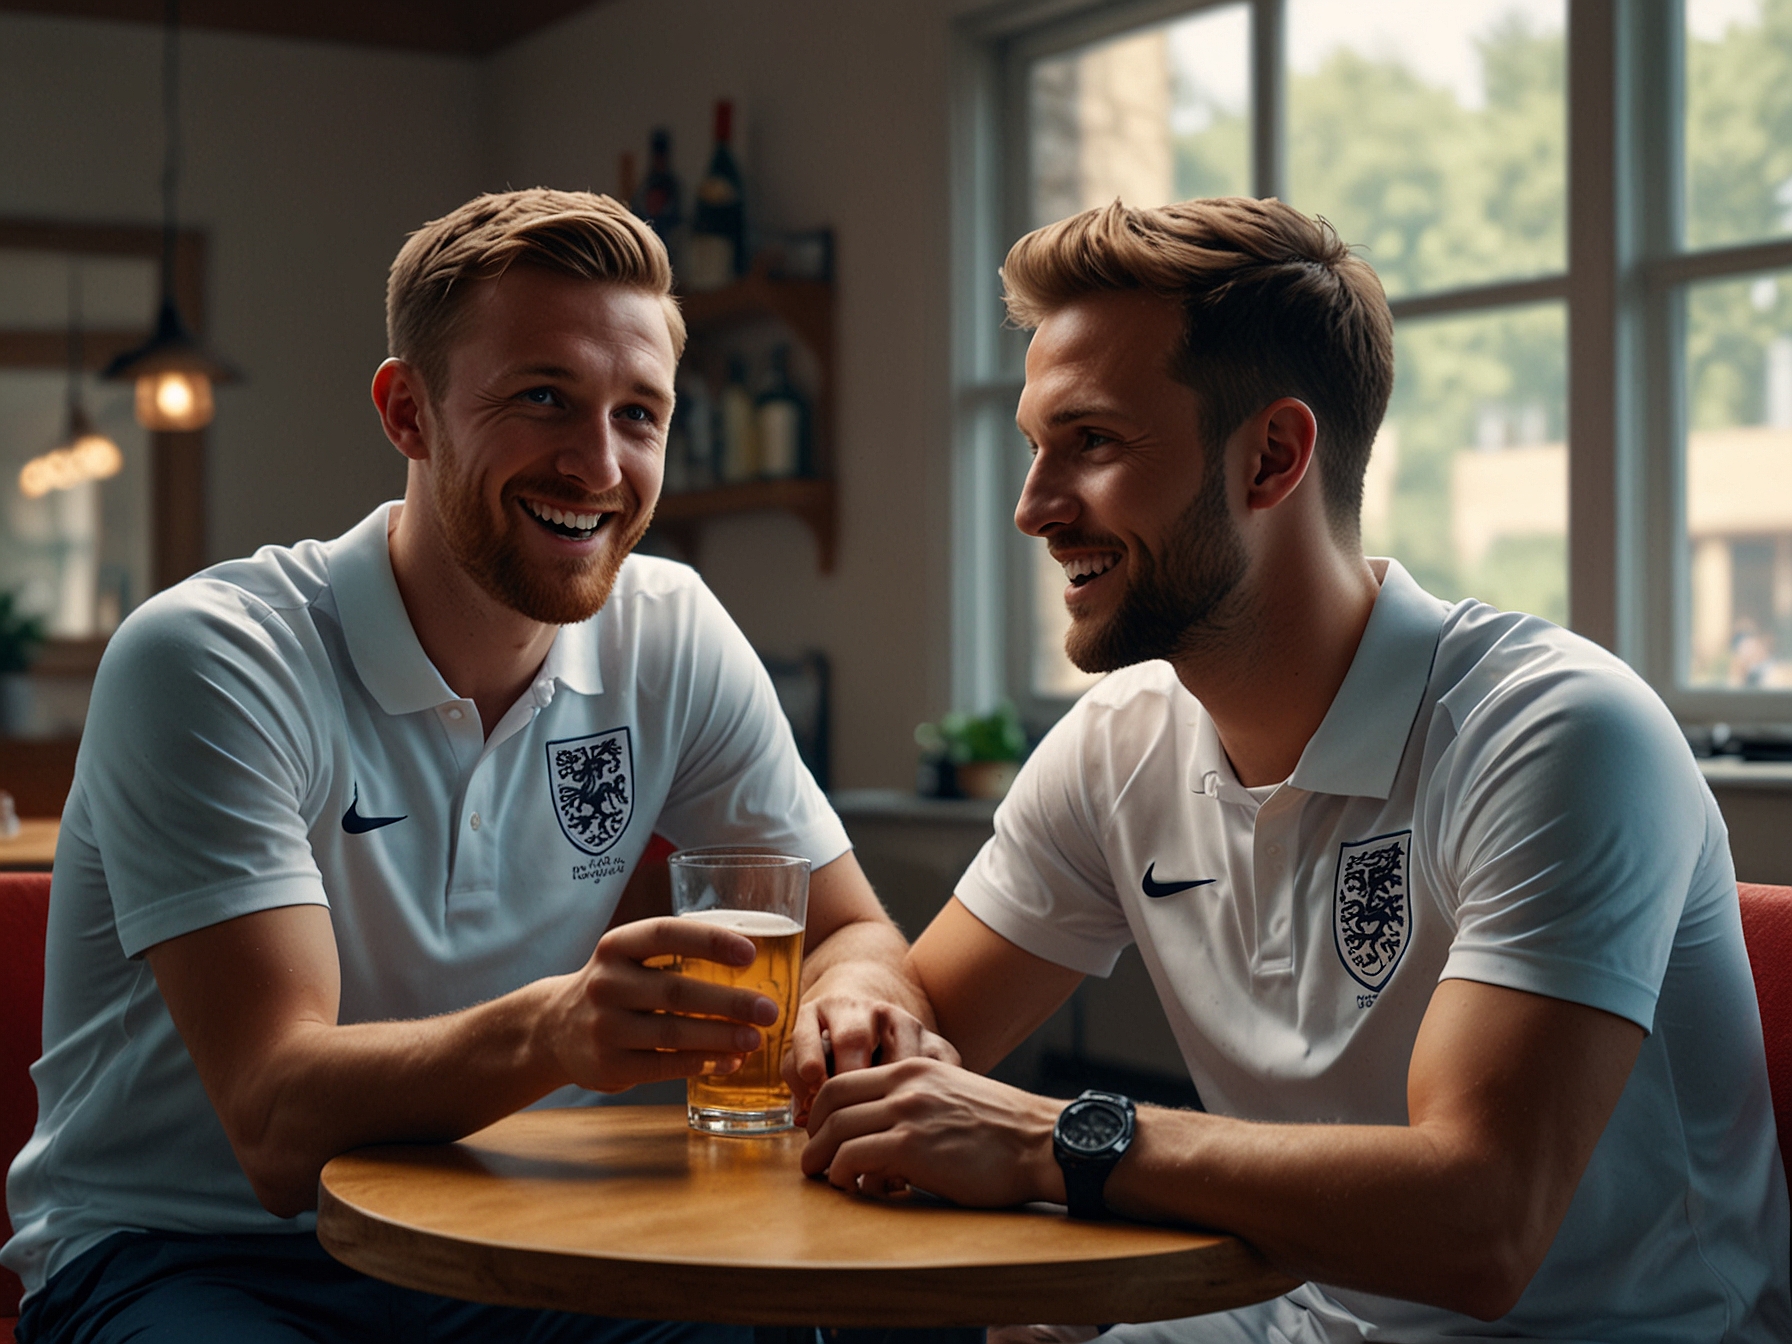 England players seen enjoying a drink together during downtime ahead of their Euro 2024 match against Slovakia, showcasing team camaraderie and relaxed morale amid the high-pressure tournament.